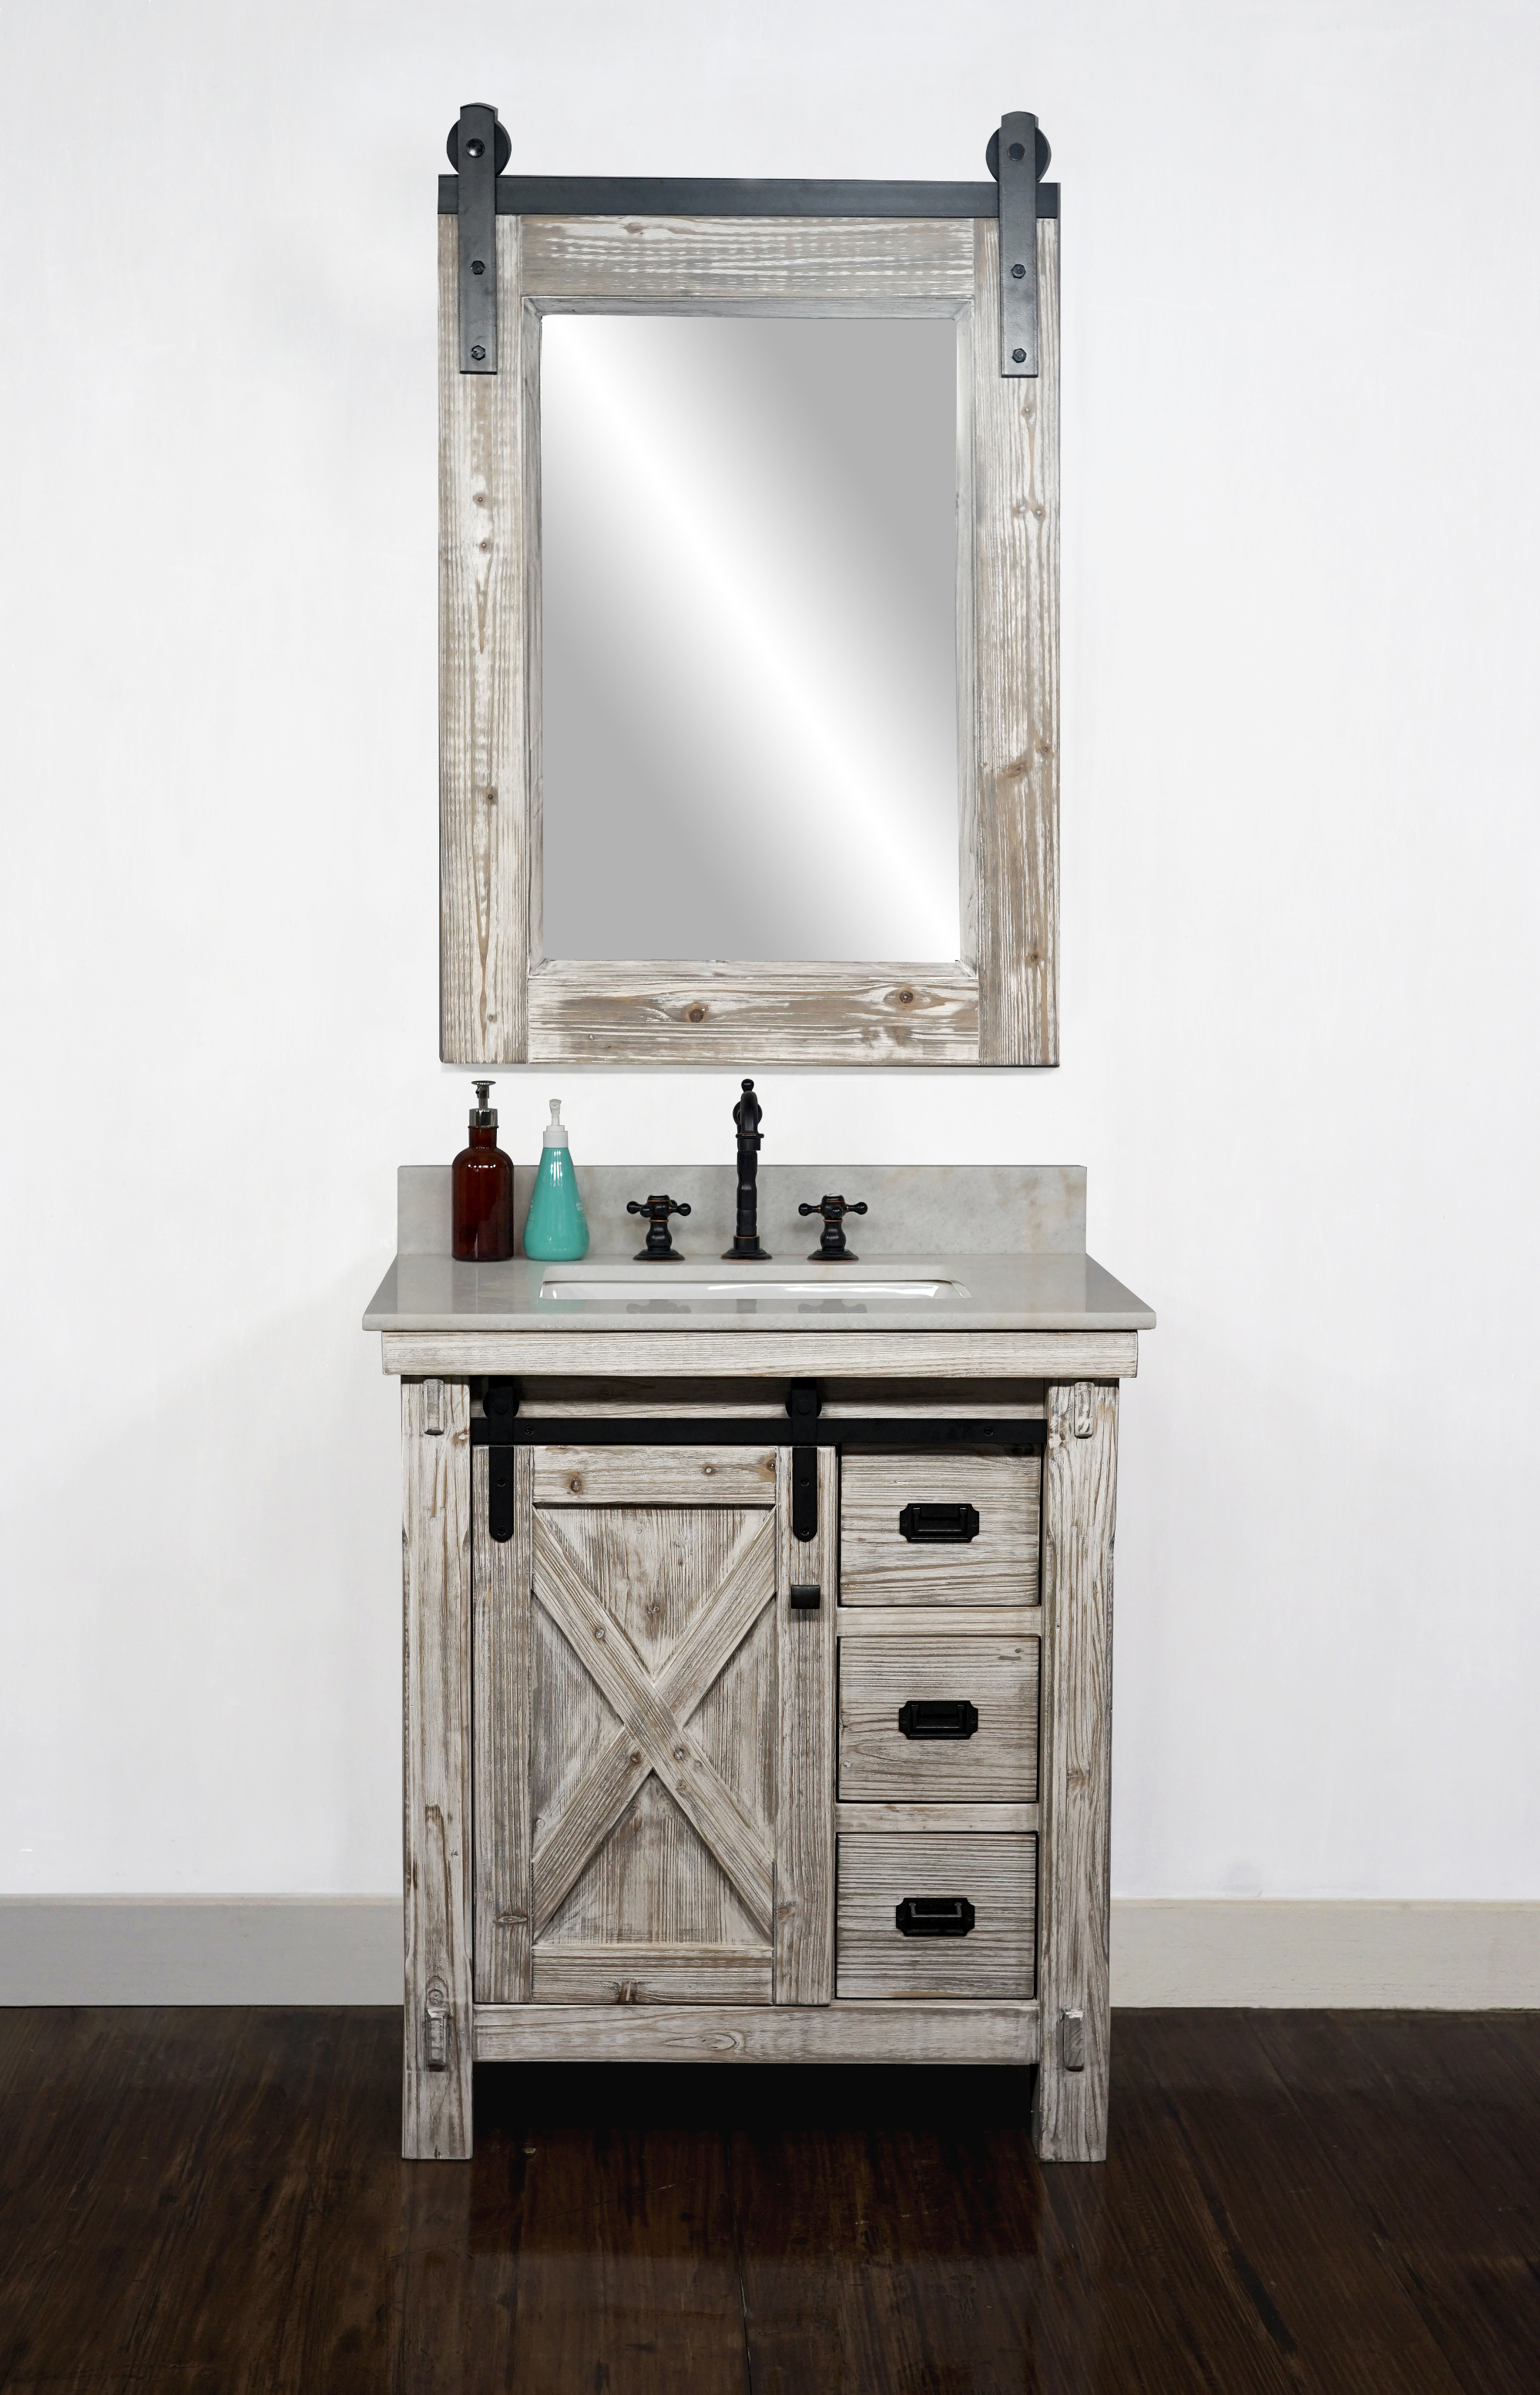 30" Rustic Solid Fir Barn Door Style Single Sink Vanity in White Washed - No Faucet with Countertop Options